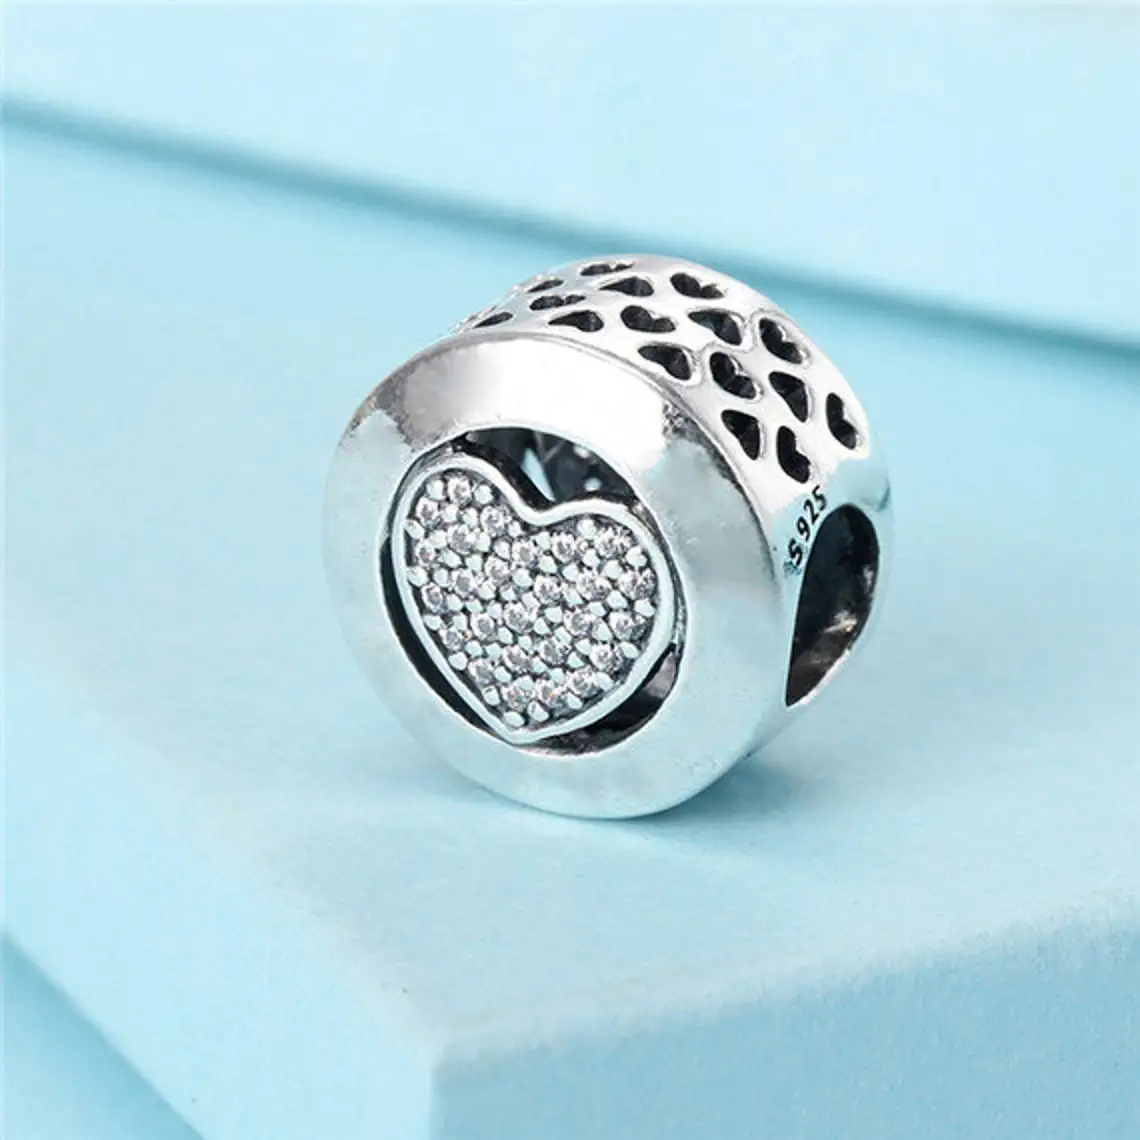 

925 Sterling Silver Signature Heart Charm Bead with Clear Cz Fits All European Pandora Jewelry Bracelets Necklaces